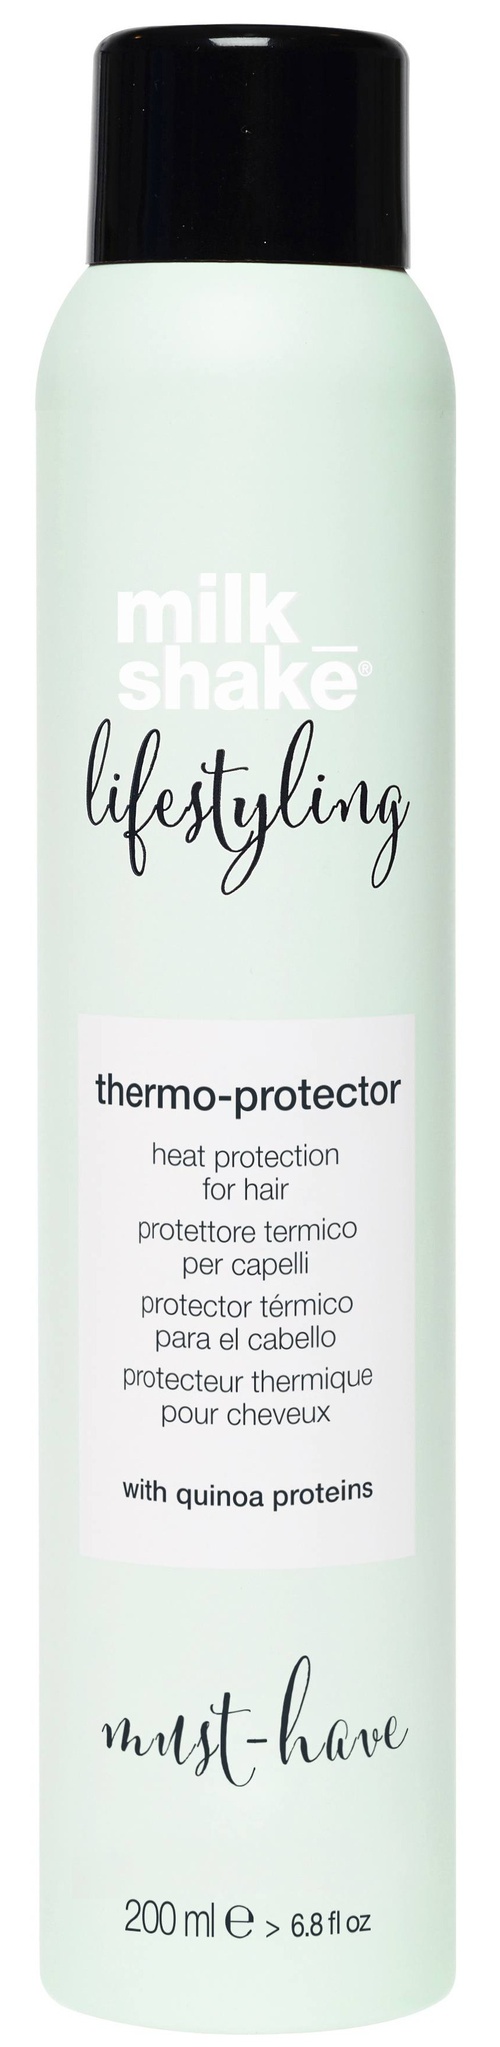 Milk shake Lifestyling Thermo-Protector